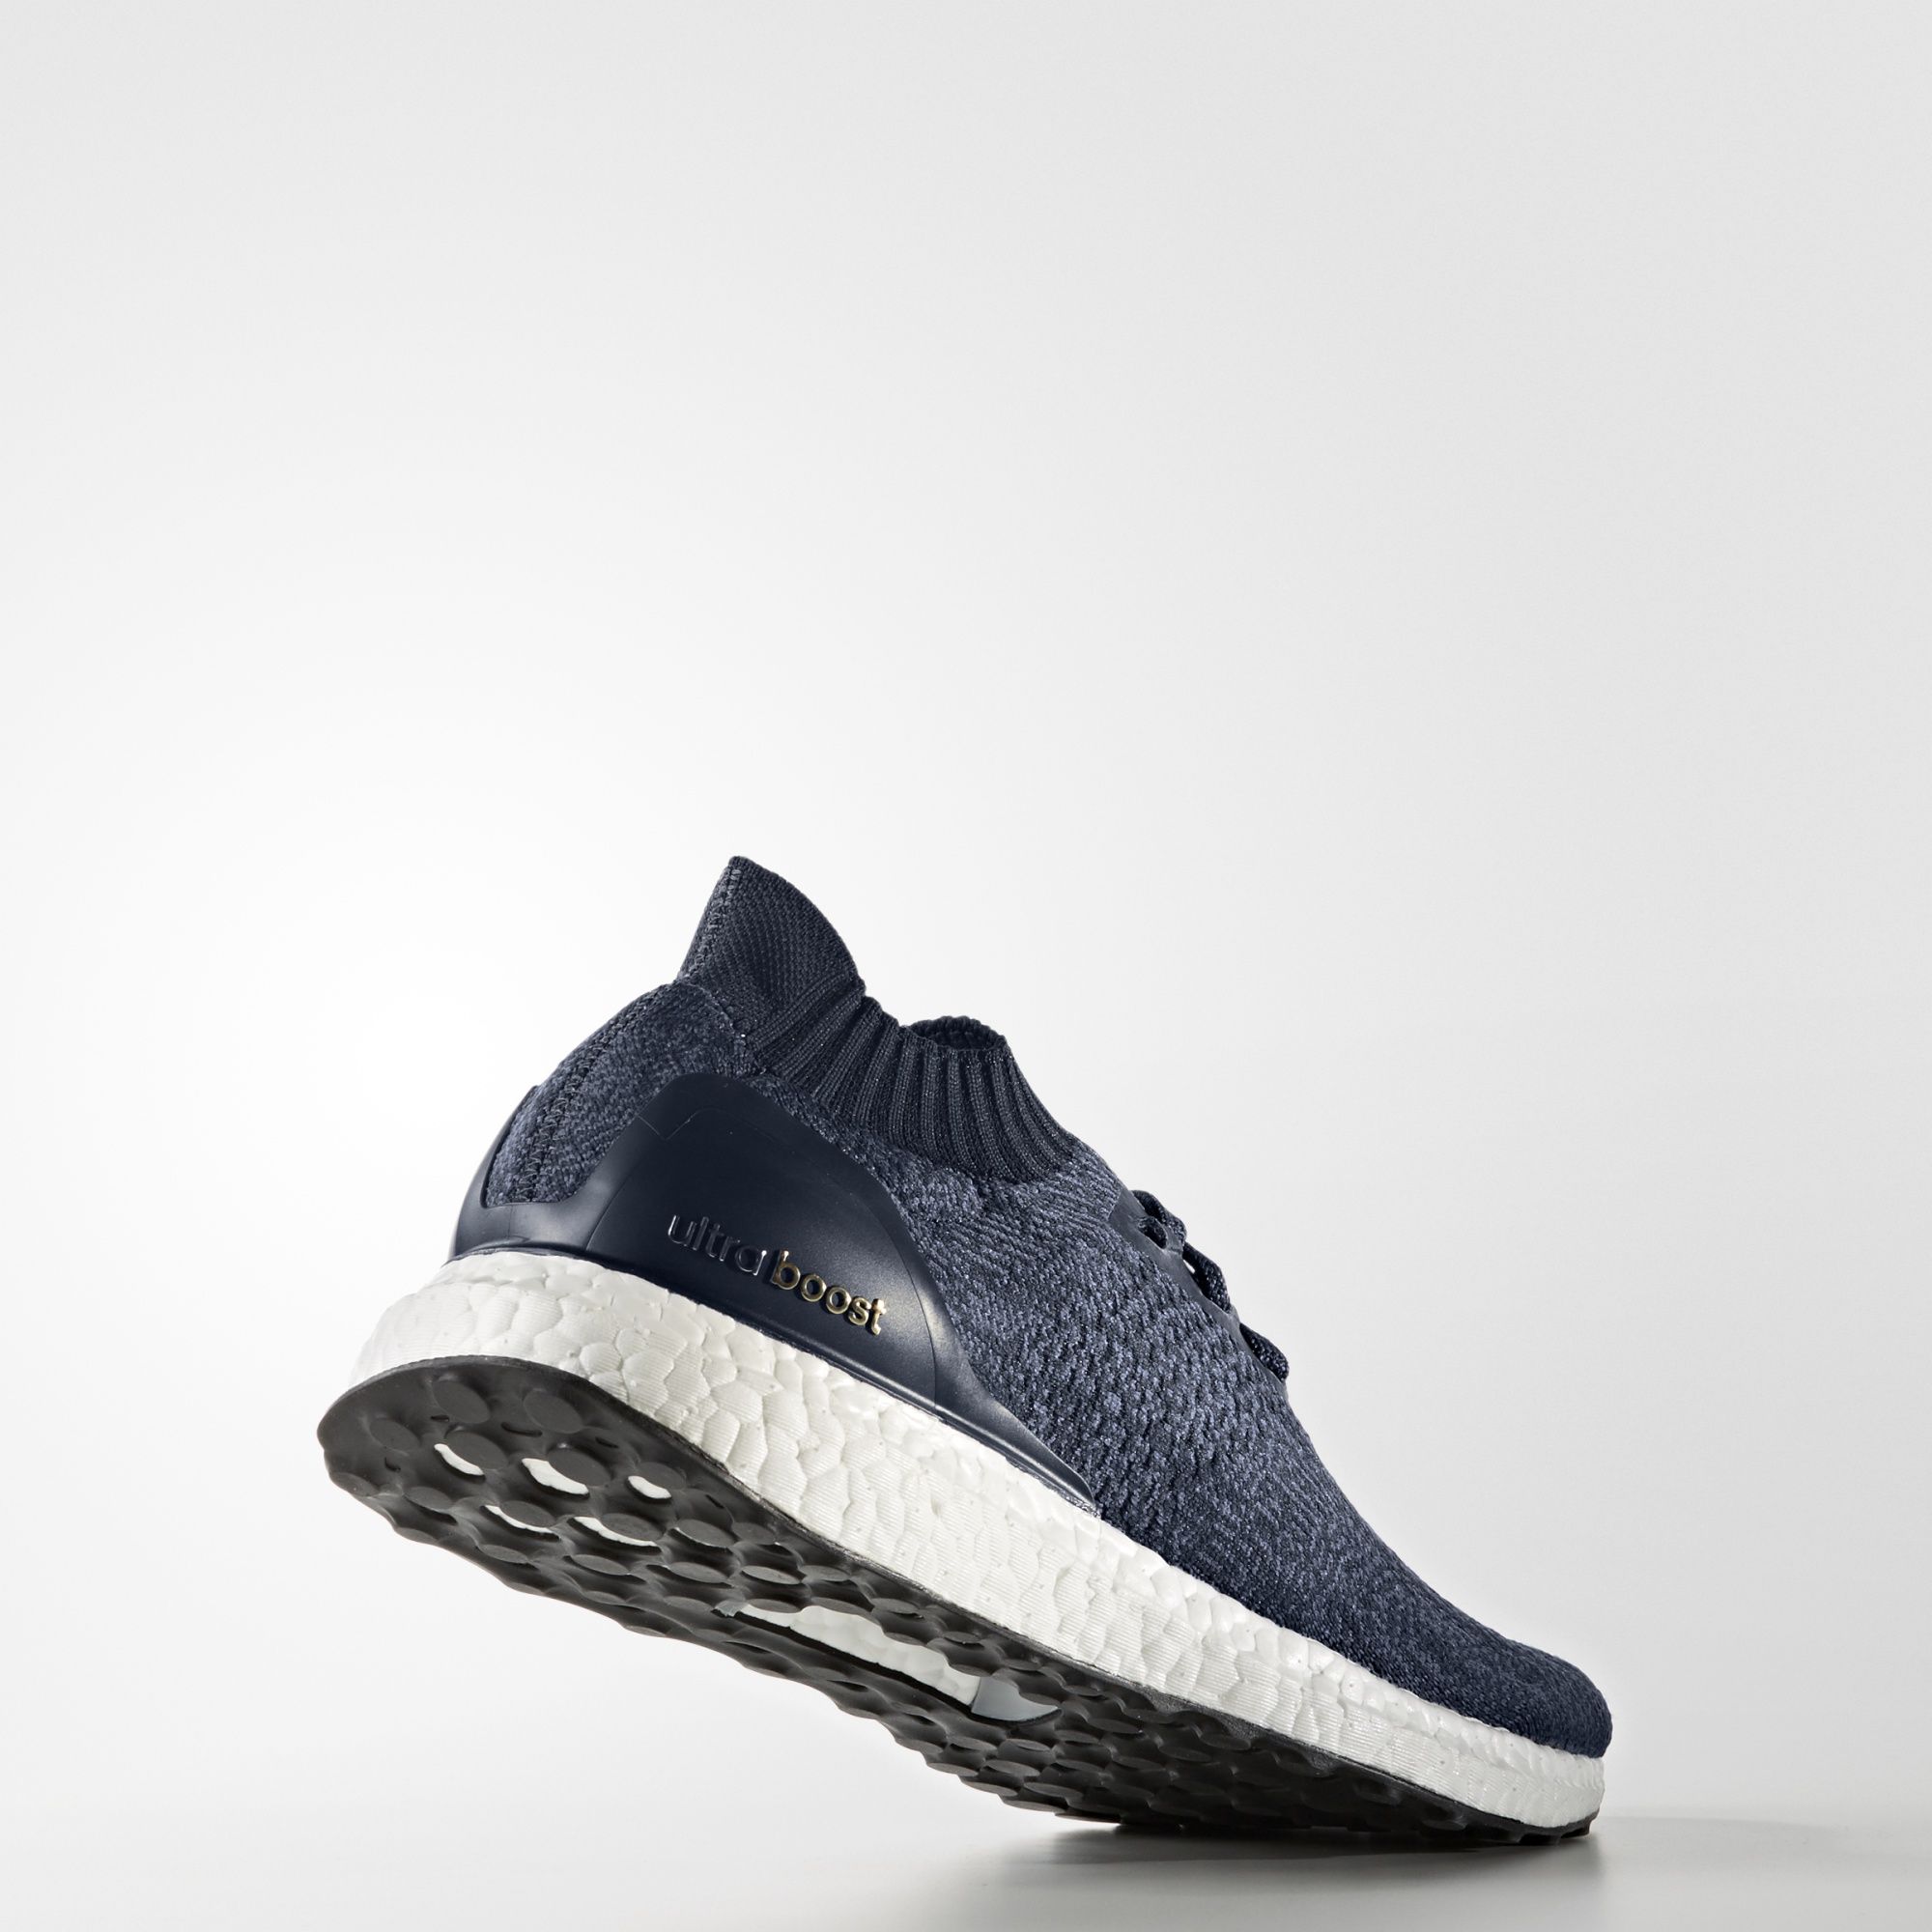 Adidas UltraBoost Uncaged 
Navy / White 